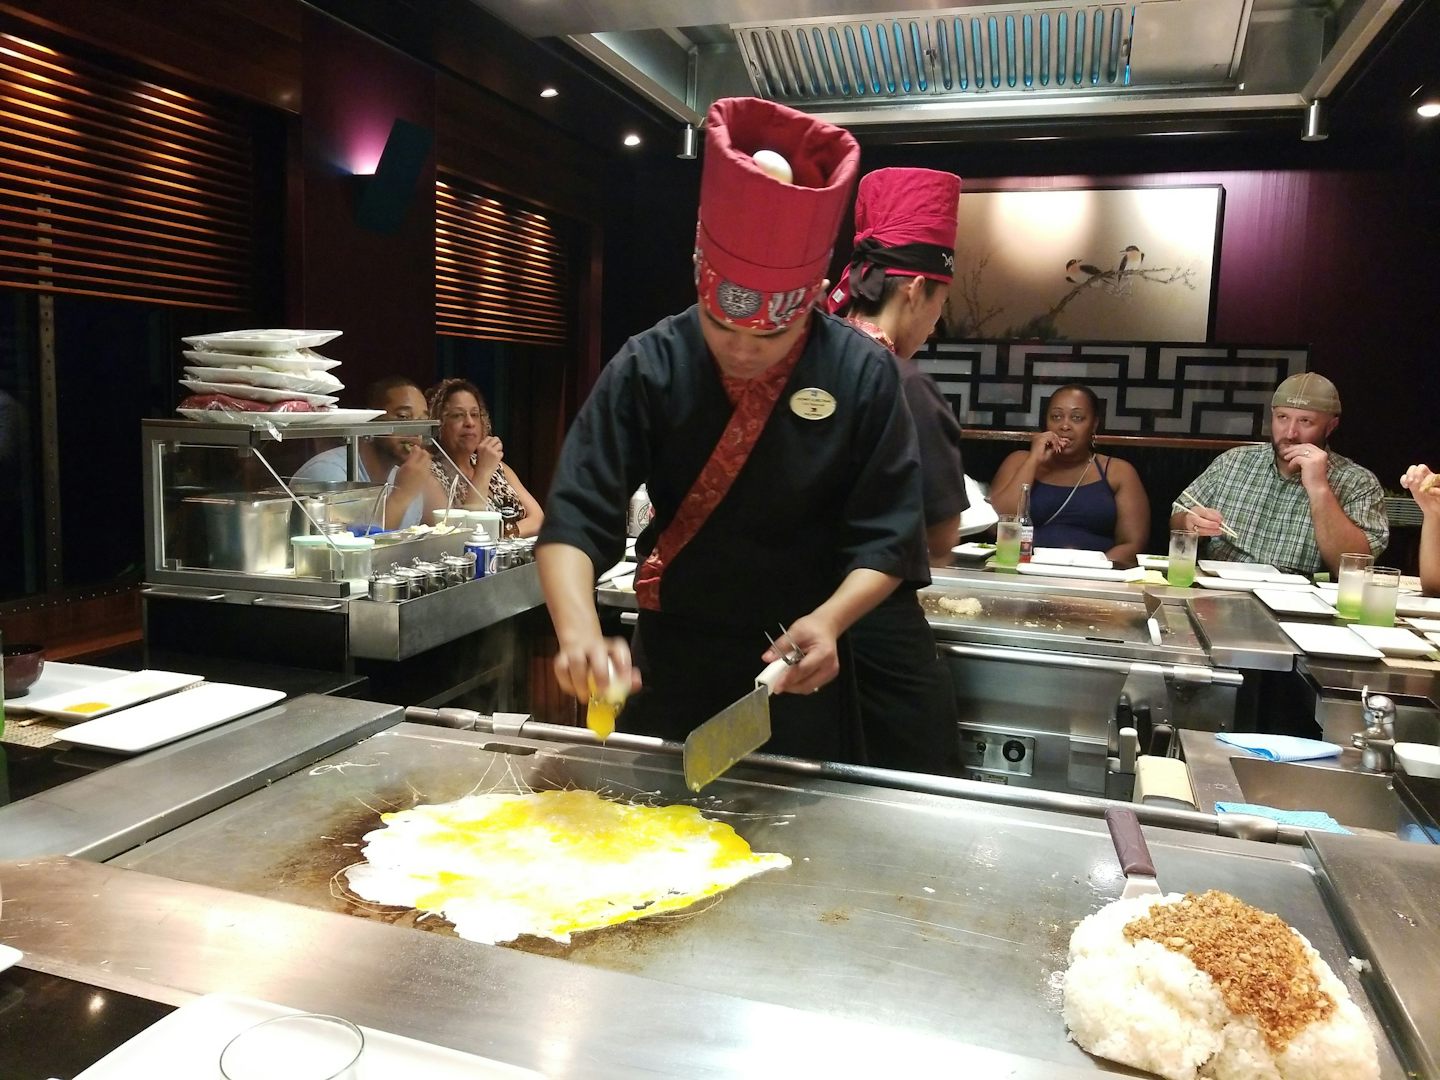 Teppanyaki hibachi dinner.  HIGHLY recommend this meal, entertaining and fl